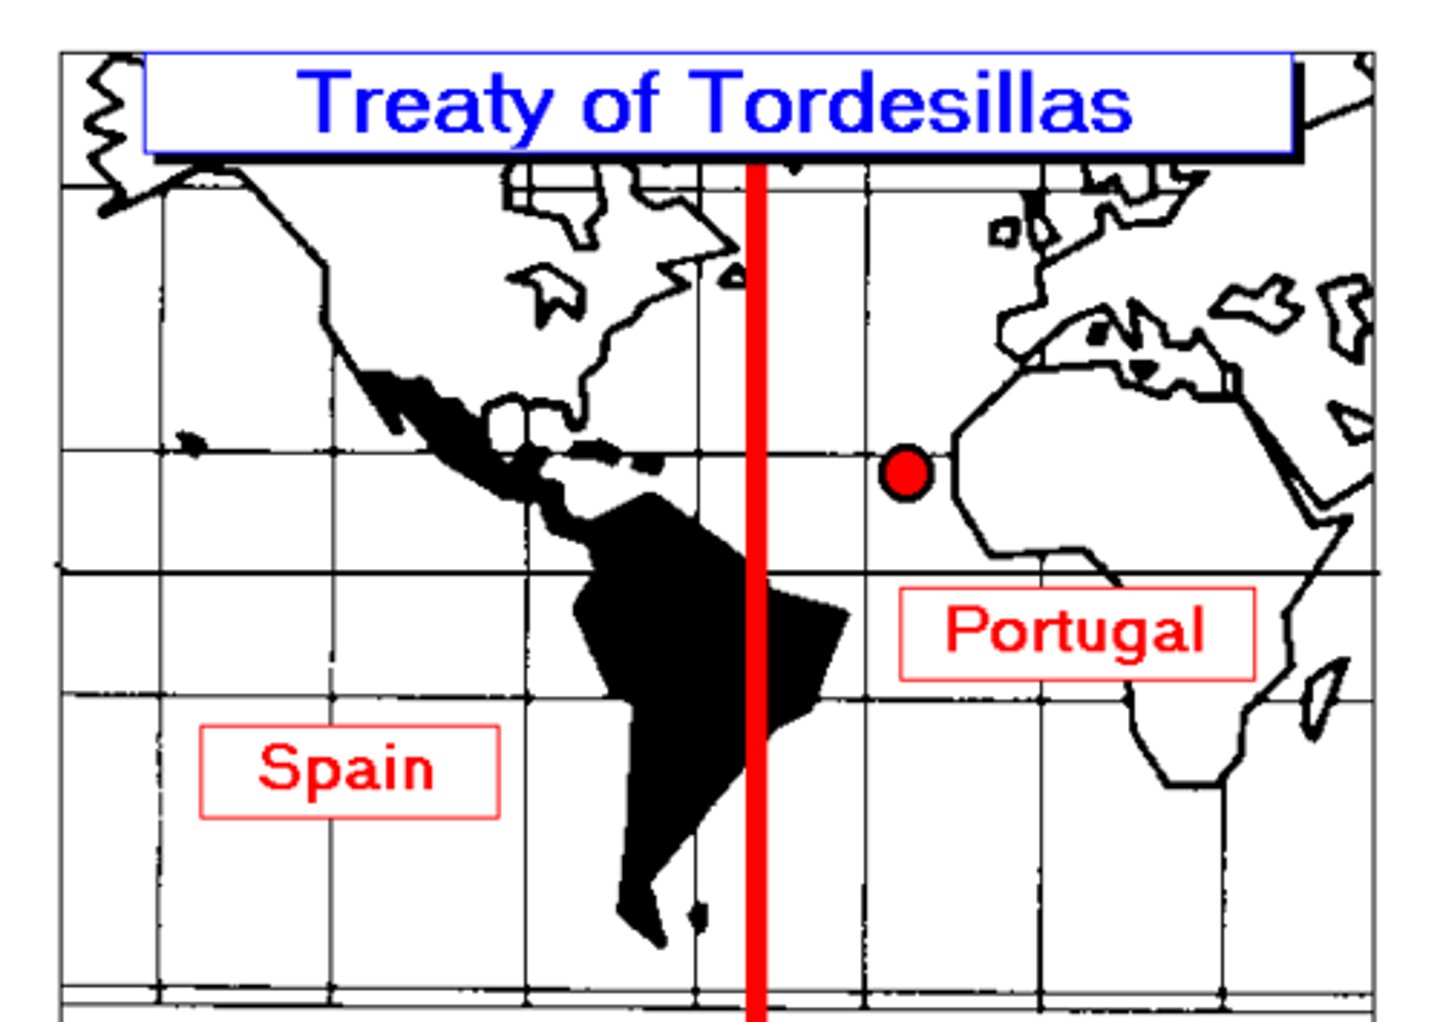 <p>An agreement between Portugal and Spain which declared that newly discovered lands to the west of an imaginary line in the Atlantic Ocean would belong to Spain and newly discovered lands to the east of the line would belong to Portugal.</p>